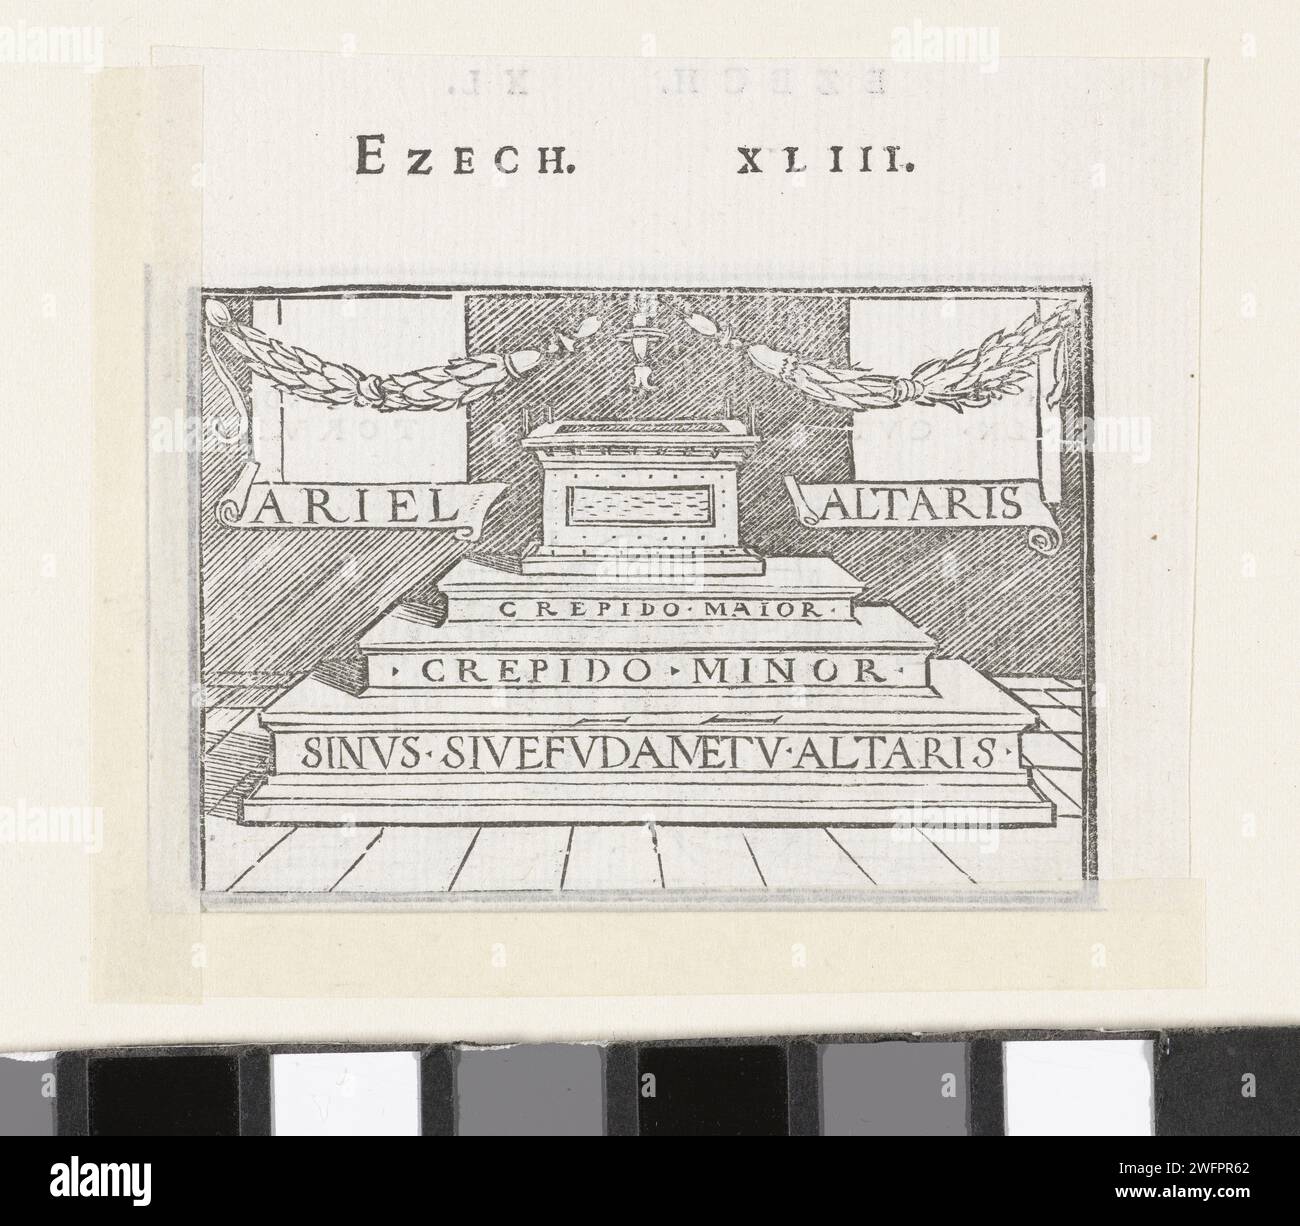 Altar in the new temple in vision of Ezekiel, Hans Holbein (II), 1538 print Altar in the new temple according to the instructions of God as Ezekiel gets to see it in a vision. Latin text is on the steps of the stage to the altar. In the margin above the image is the text Ezek. XLIII.  paper  the Lord's ordinances of the altar  Ezekiel's vision of the new temple Stock Photo